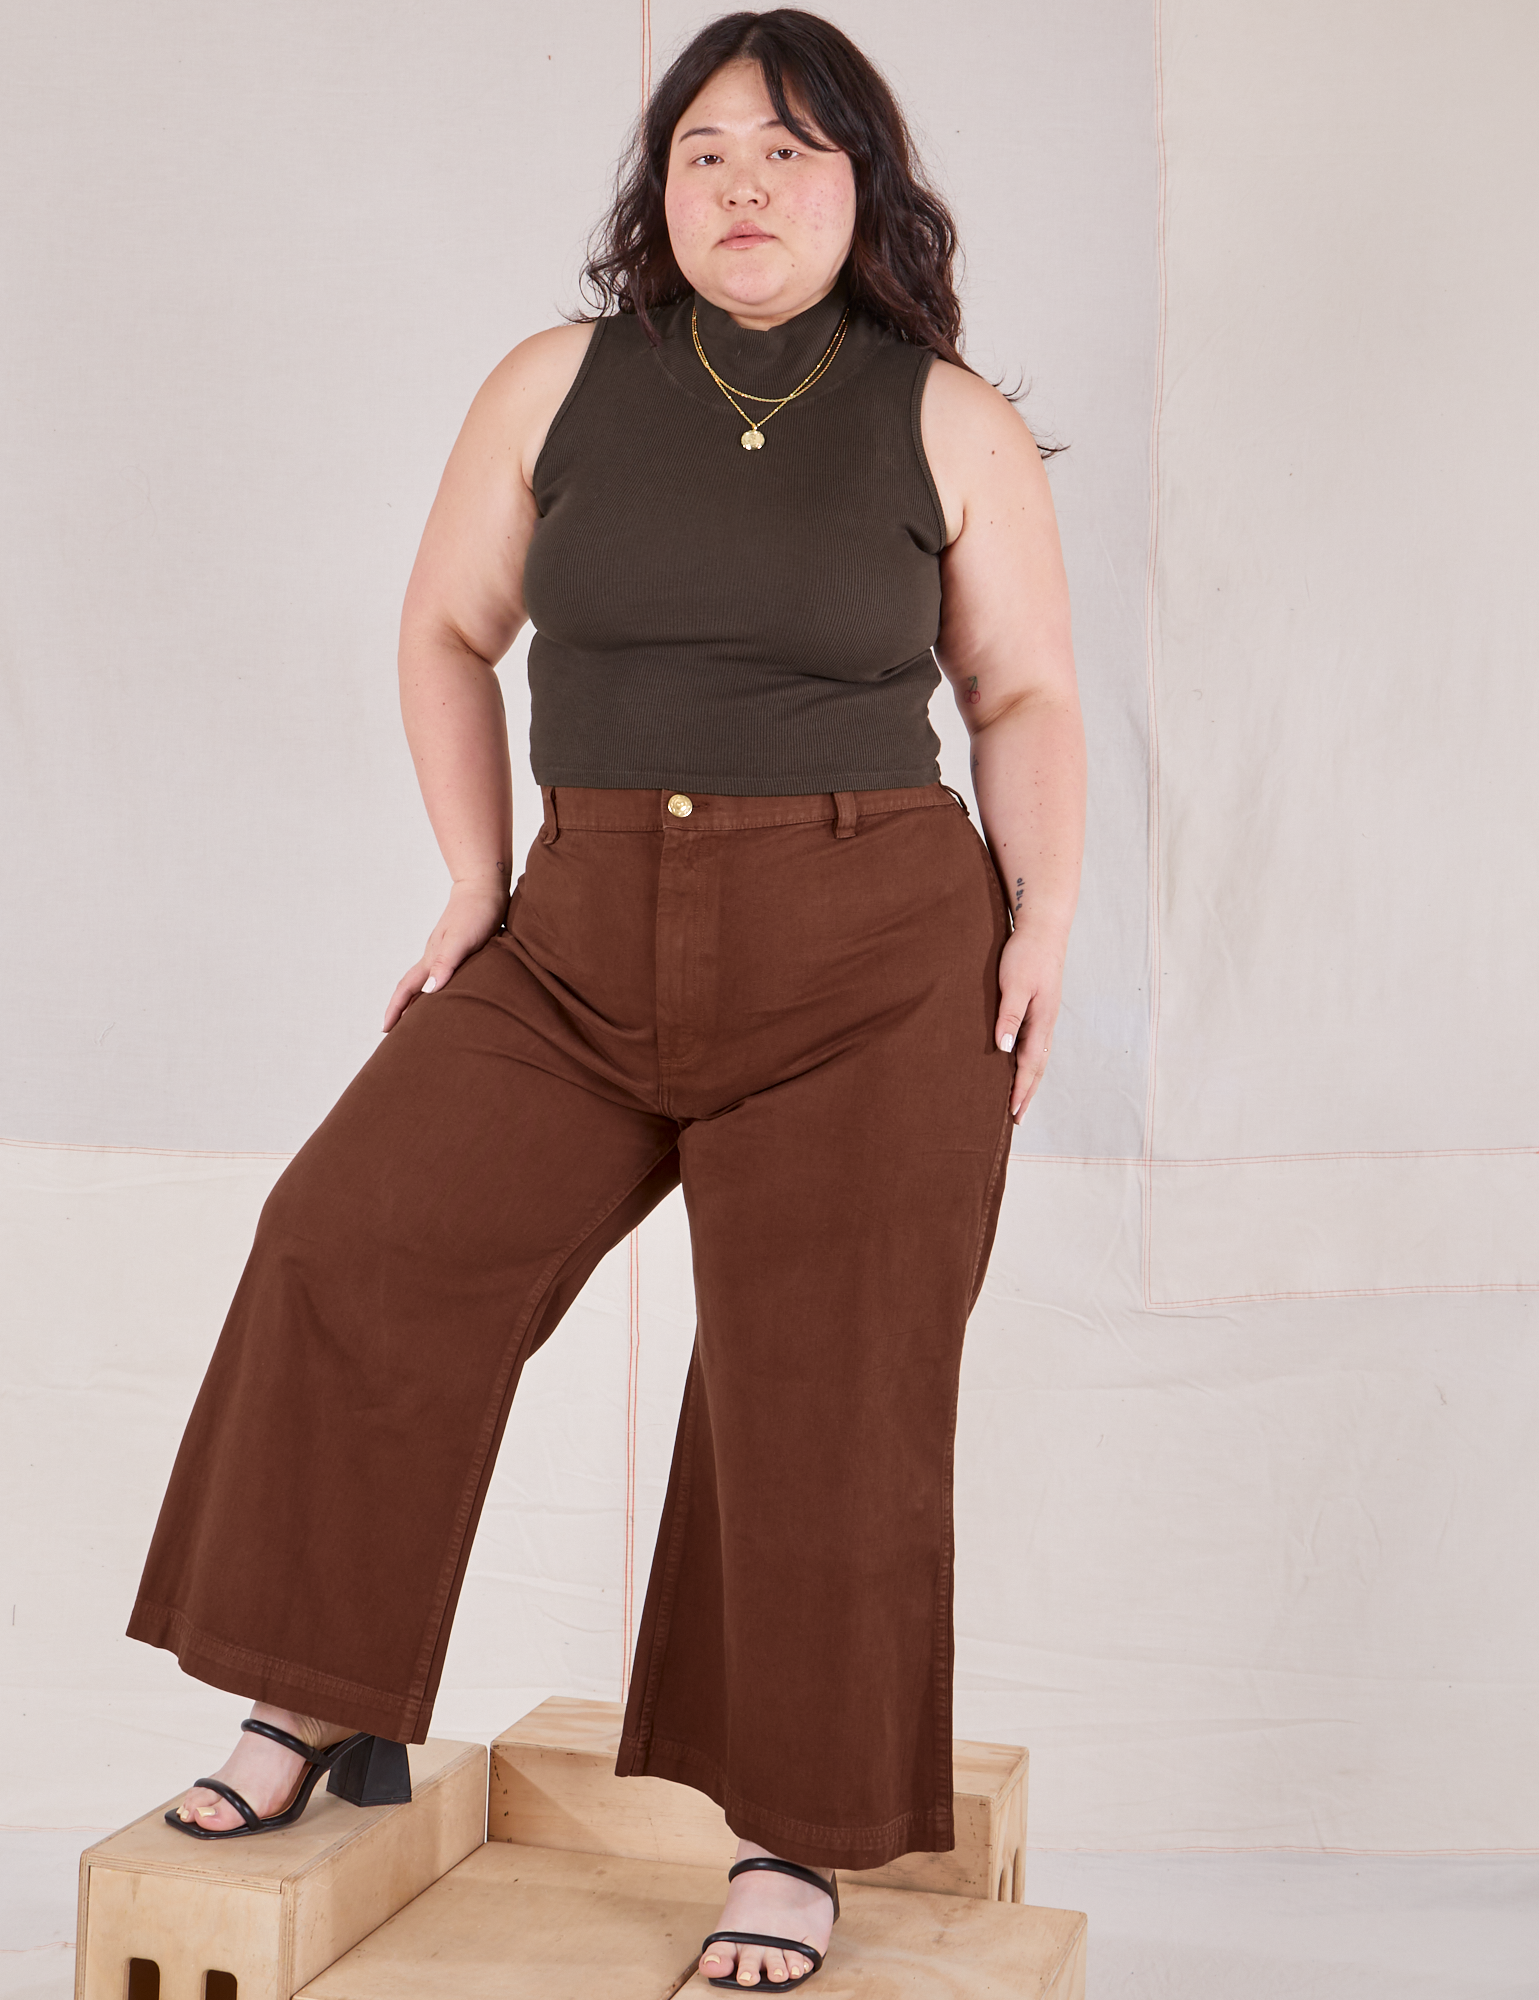 Ashley is wearing Sleeveless Essential Turtleneck in Espresso Brown and fudgesicle brown Bell Bottoms